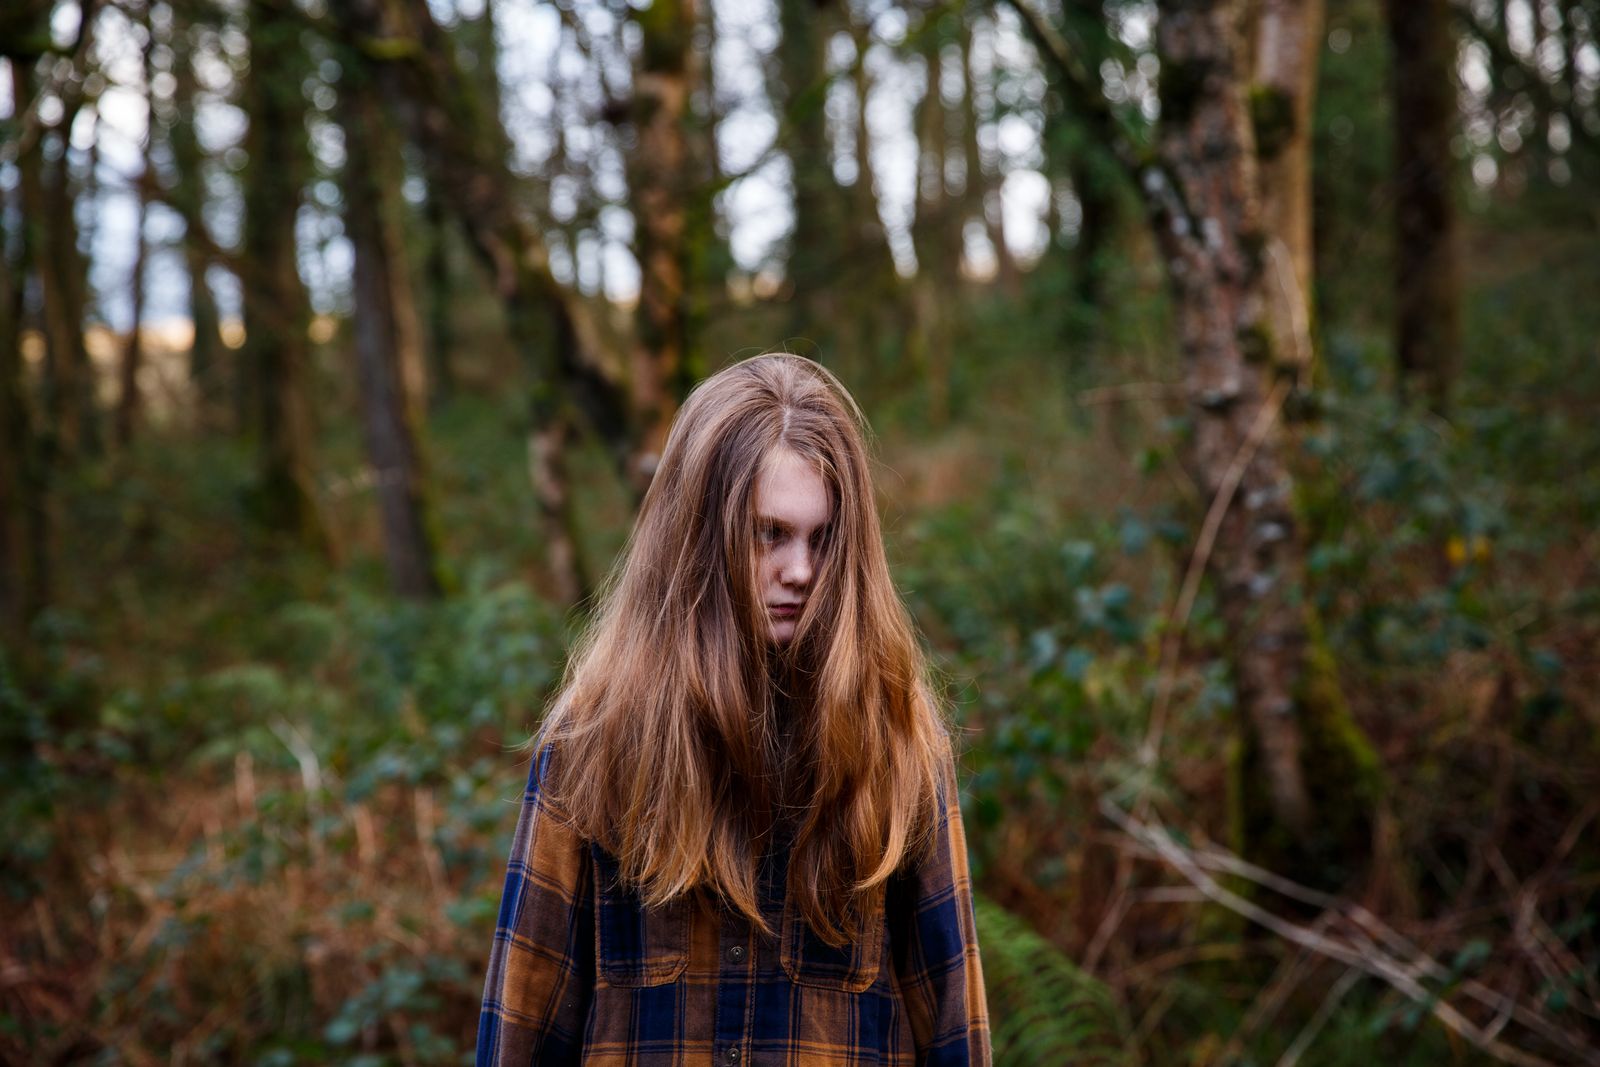 © Sarah Brittain Edwards - Self-Conscious In The Woods